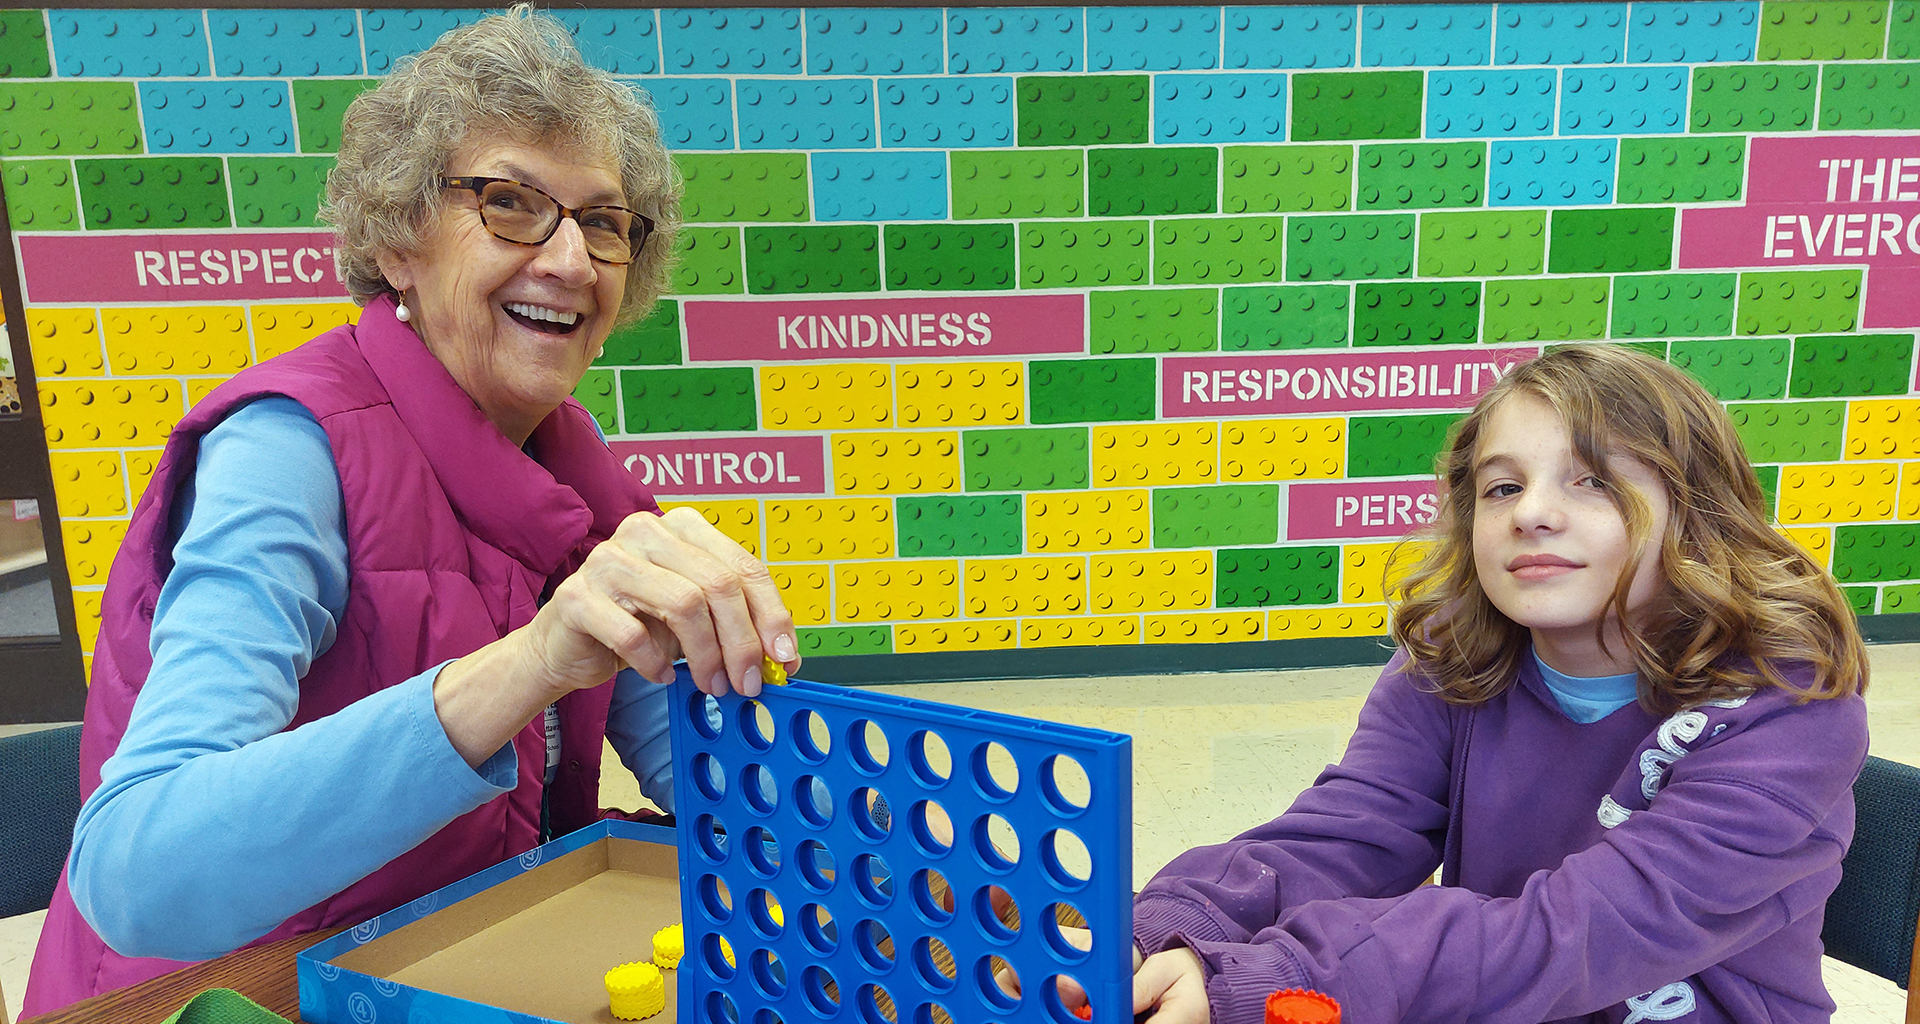 Female volunteer plays a game with a female student.